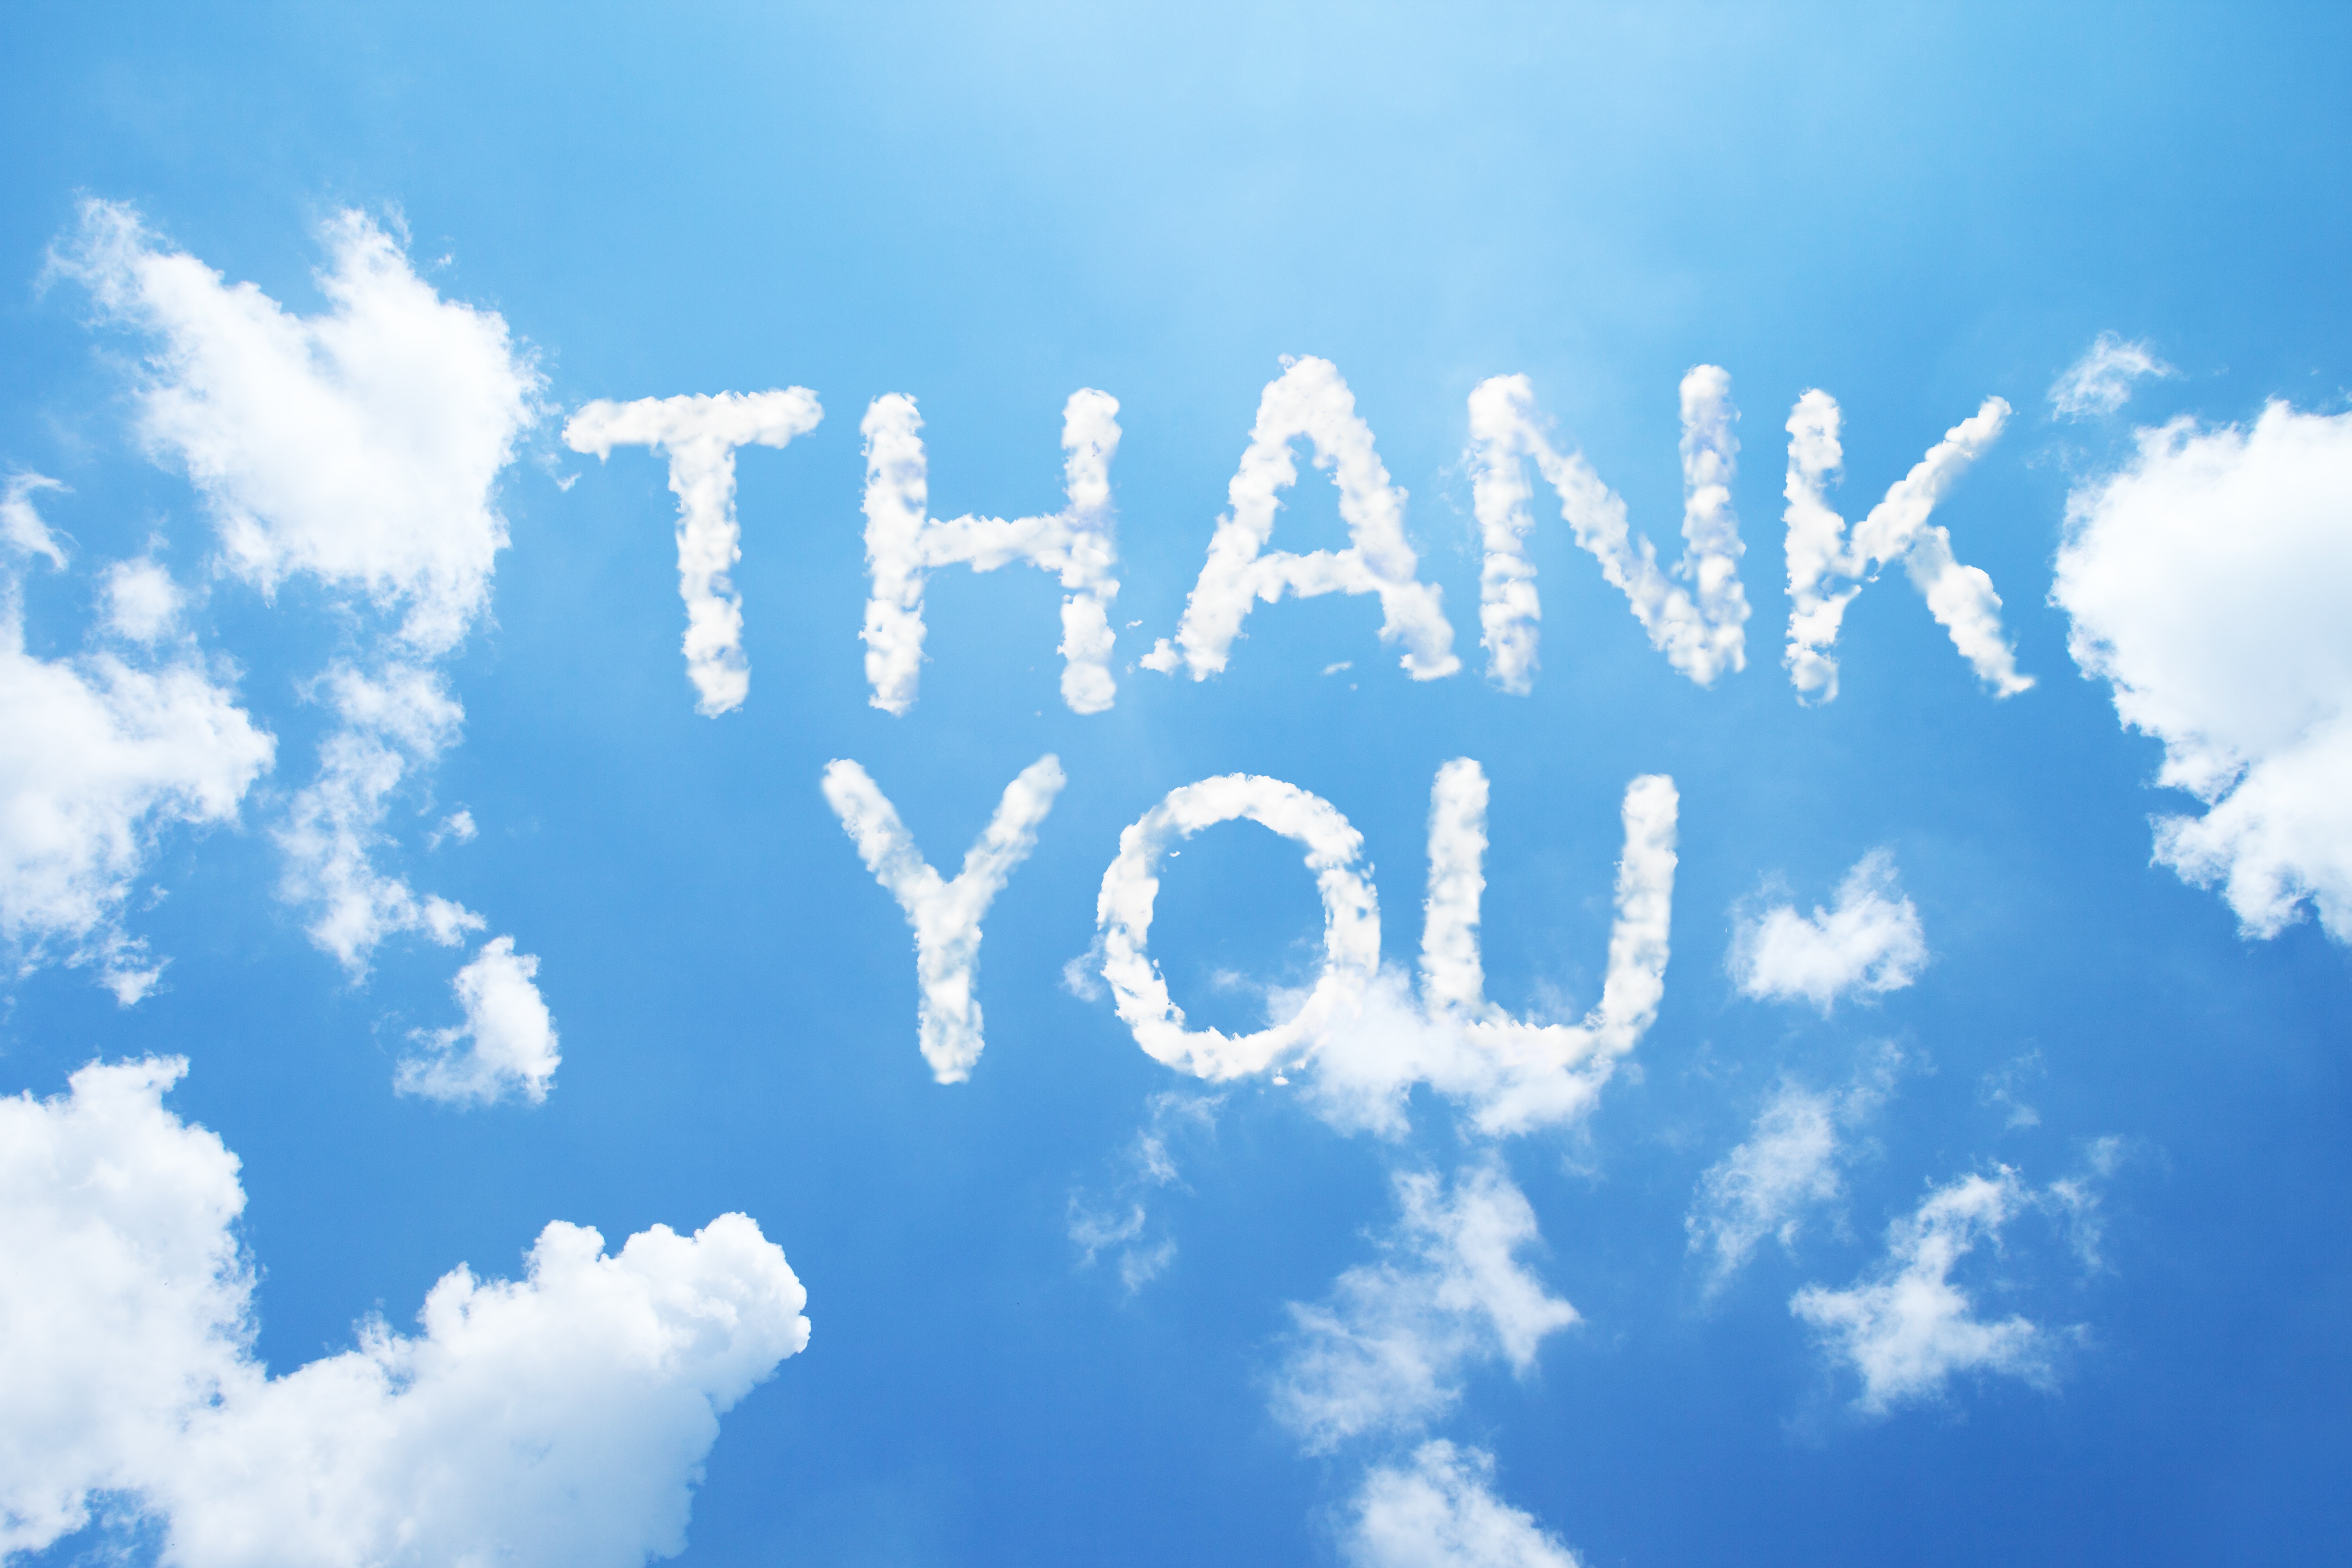 Thank you is written out in a blue sky.